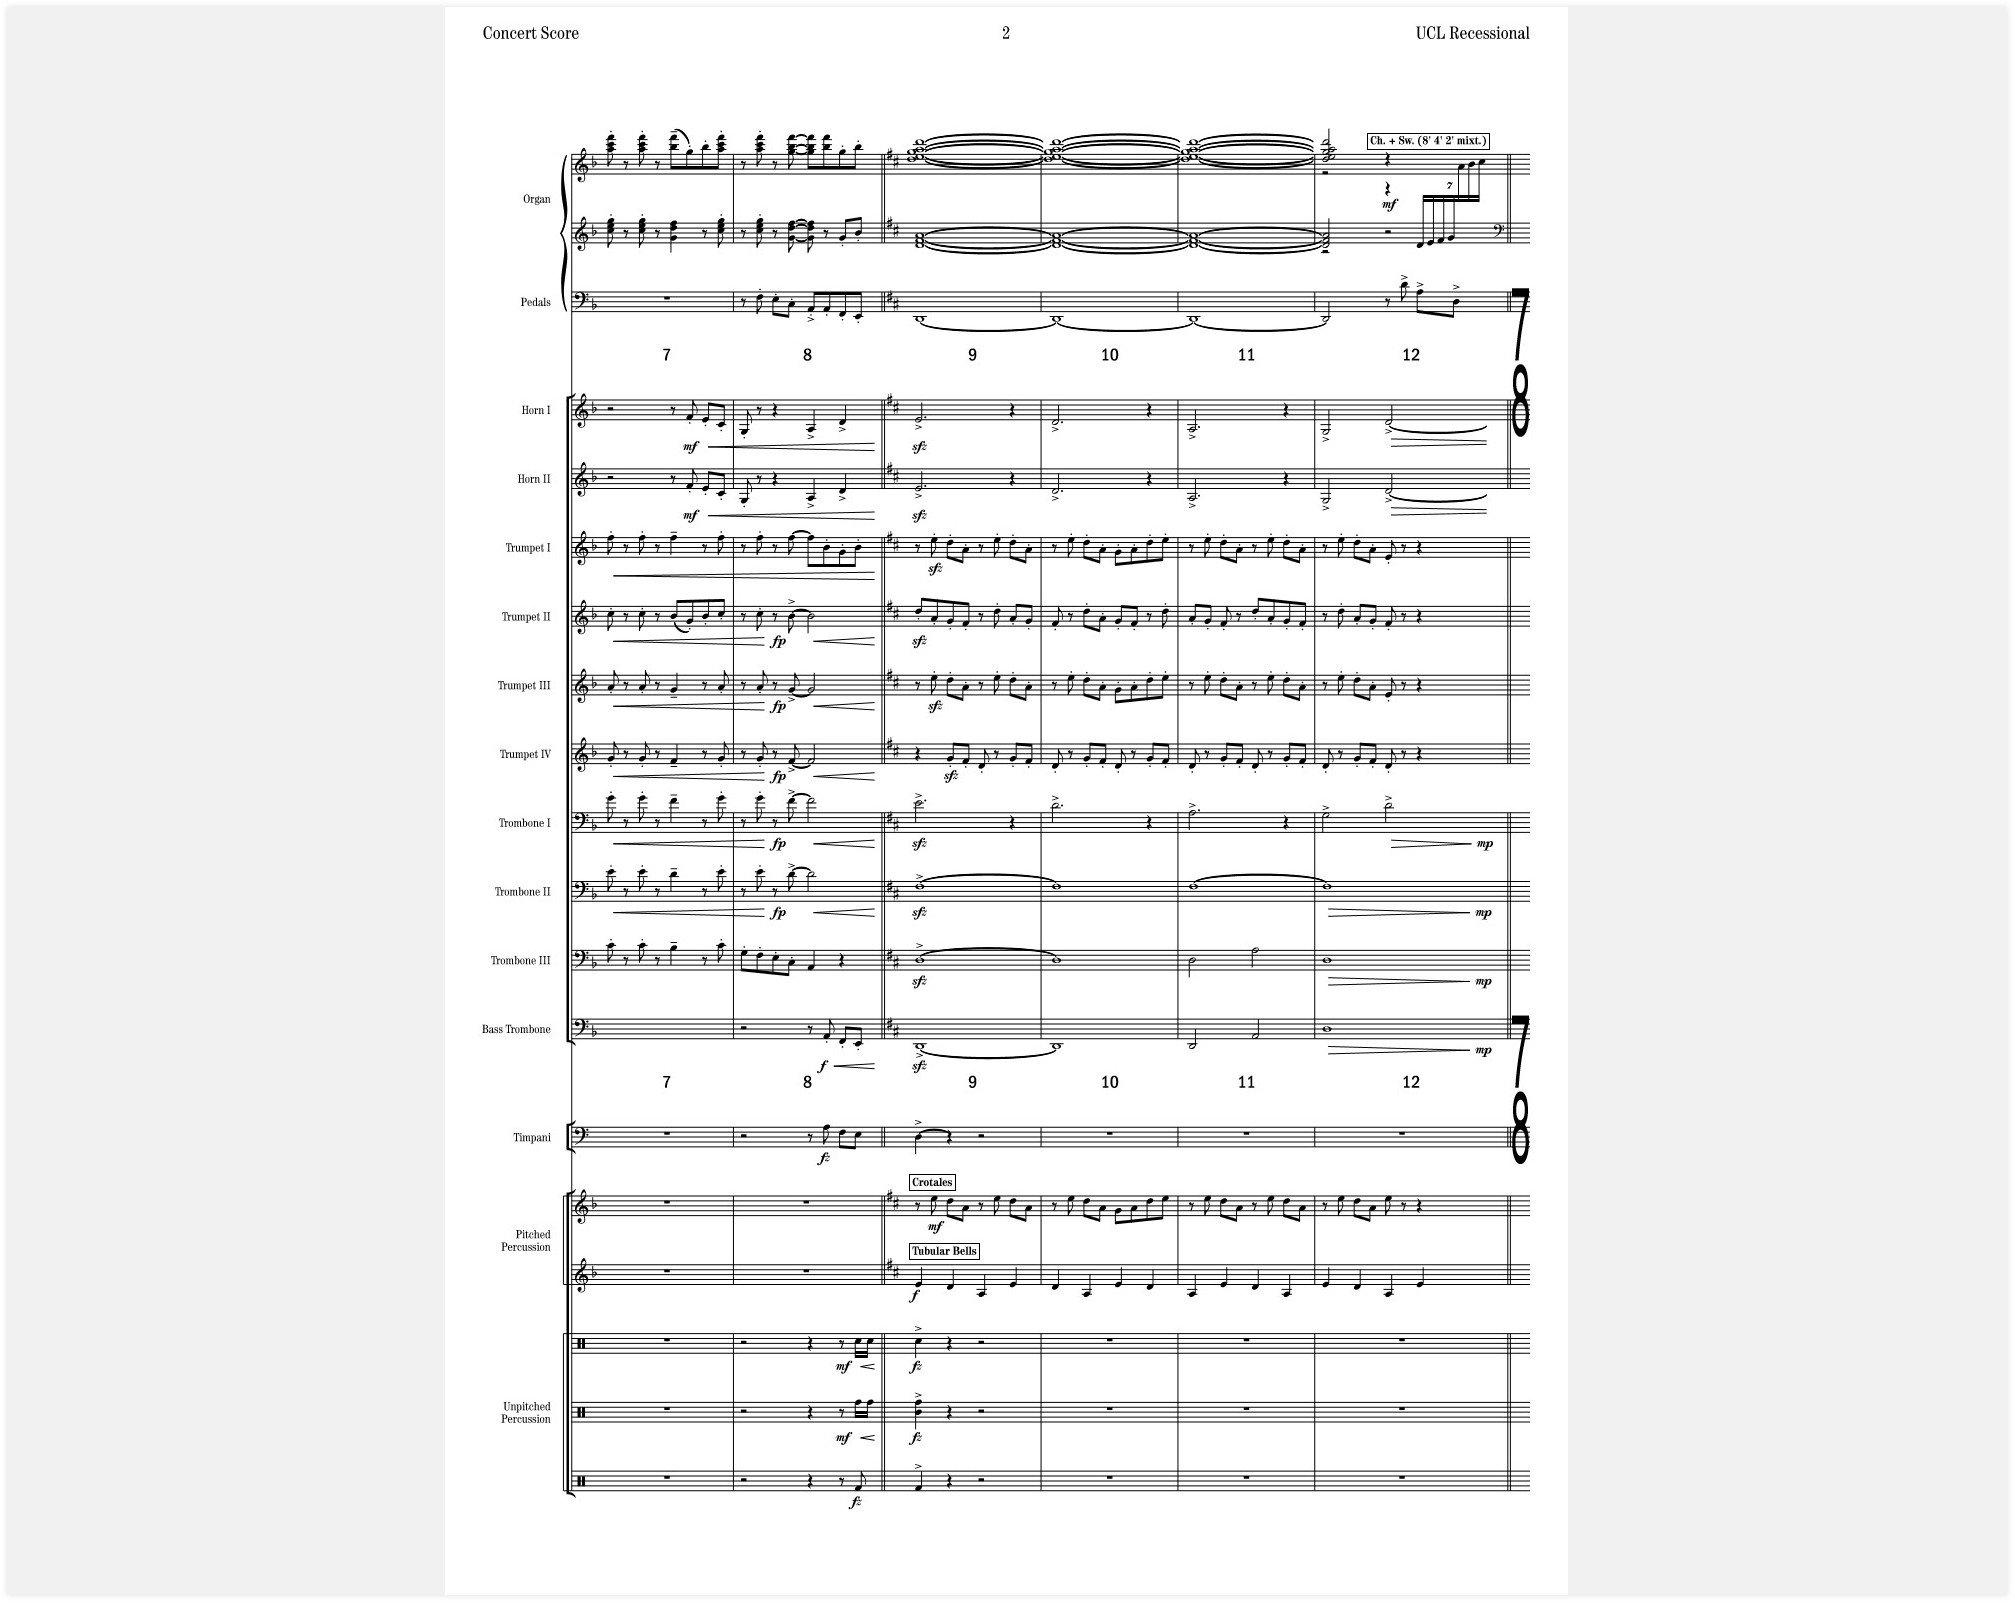 Processional and Recessional (Faber) - Concert Score_26.jpg